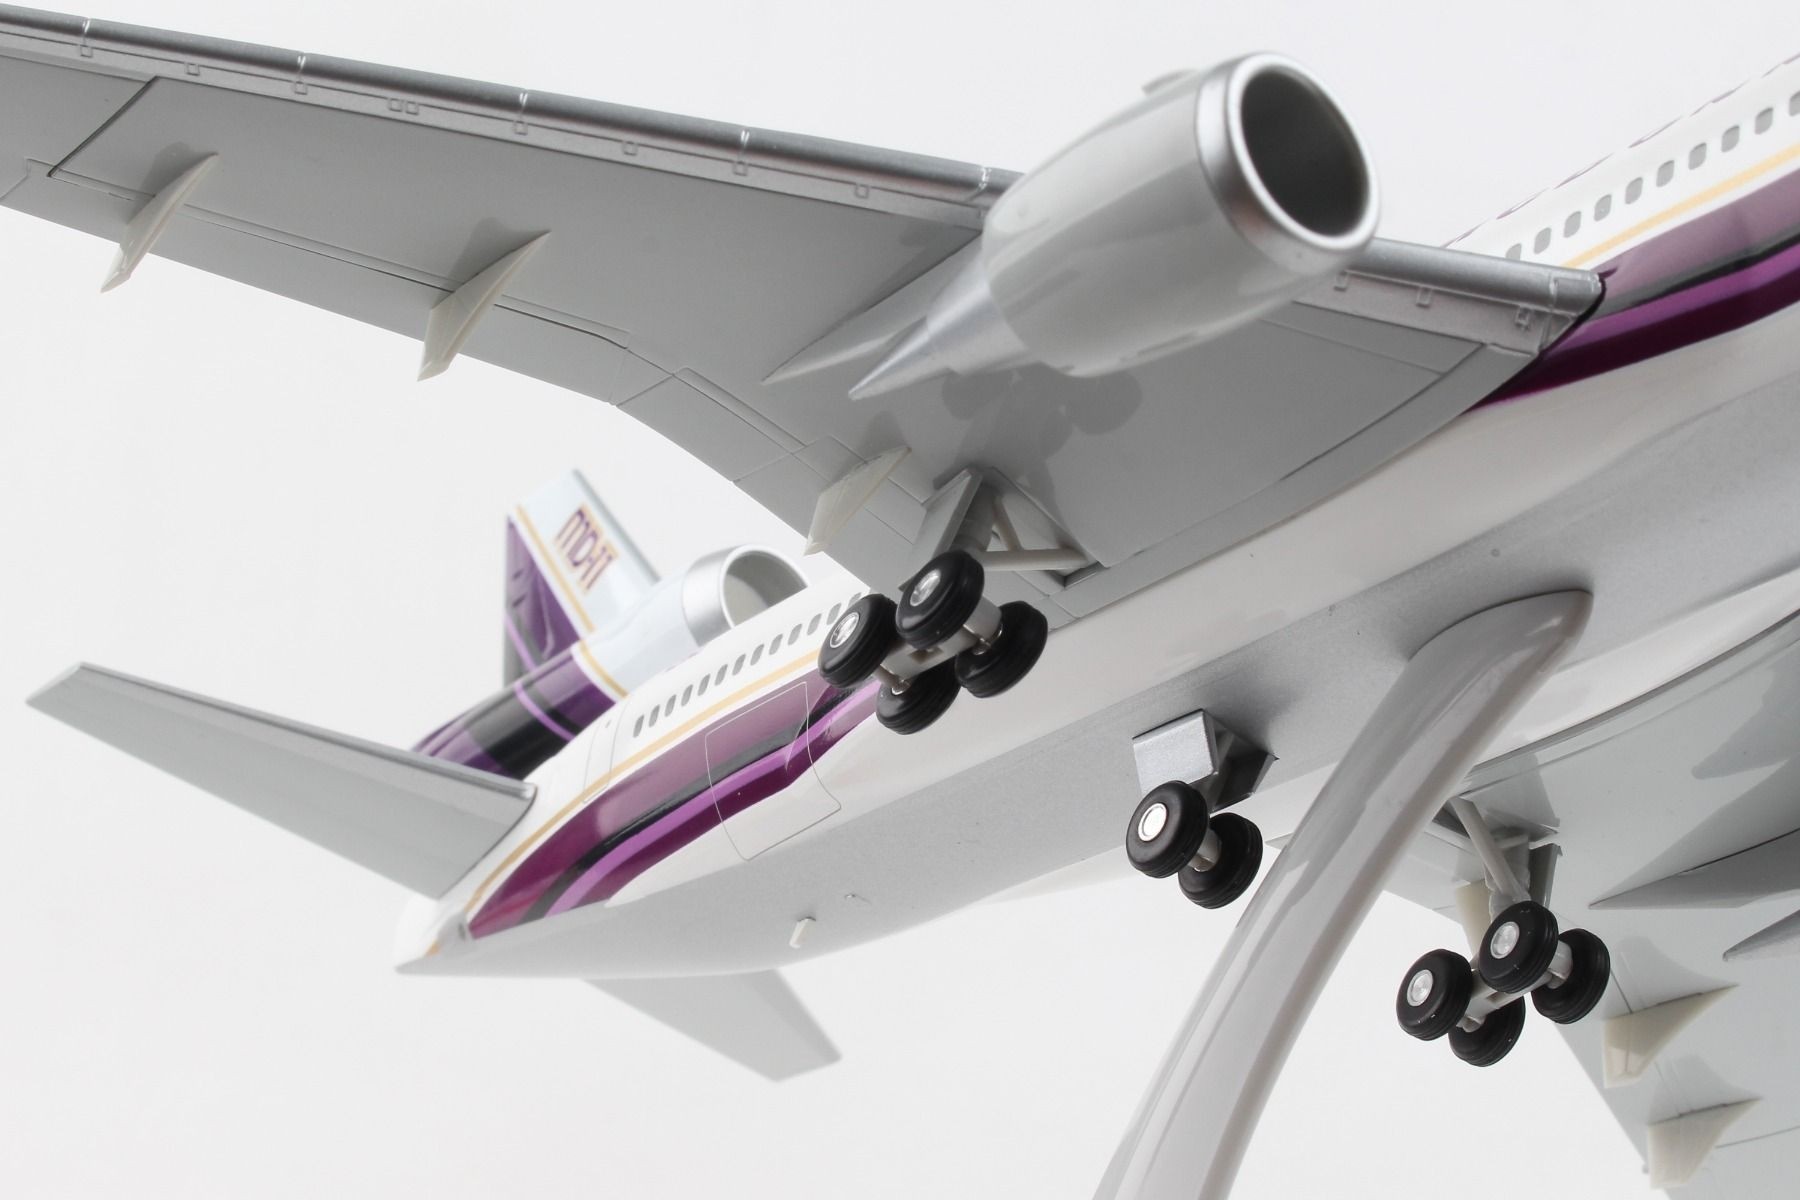 McDonnell Douglas House Color Purple MD-11 1:200 N211MD Diecast Airplane Model 